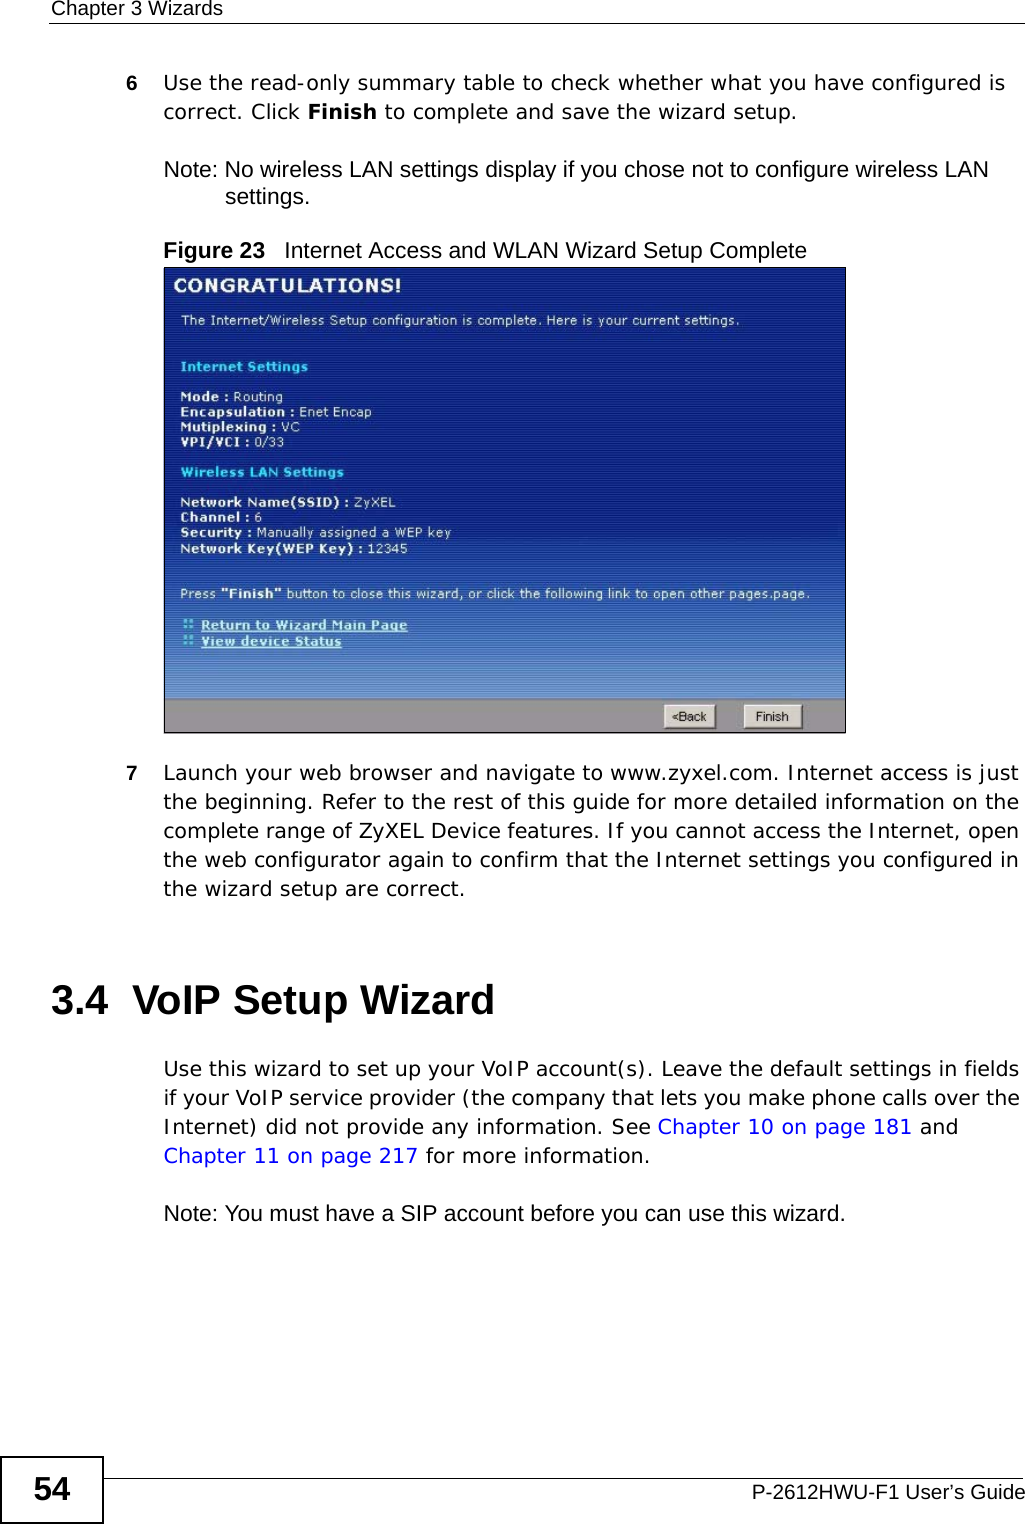 Chapter 3 WizardsP-2612HWU-F1 User’s Guide546Use the read-only summary table to check whether what you have configured is correct. Click Finish to complete and save the wizard setup.Note: No wireless LAN settings display if you chose not to configure wireless LAN settings.Figure 23   Internet Access and WLAN Wizard Setup Complete7Launch your web browser and navigate to www.zyxel.com. Internet access is just the beginning. Refer to the rest of this guide for more detailed information on the complete range of ZyXEL Device features. If you cannot access the Internet, open the web configurator again to confirm that the Internet settings you configured in the wizard setup are correct.3.4  VoIP Setup WizardUse this wizard to set up your VoIP account(s). Leave the default settings in fields if your VoIP service provider (the company that lets you make phone calls over the Internet) did not provide any information. See Chapter 10 on page 181 and Chapter 11 on page 217 for more information.Note: You must have a SIP account before you can use this wizard. 